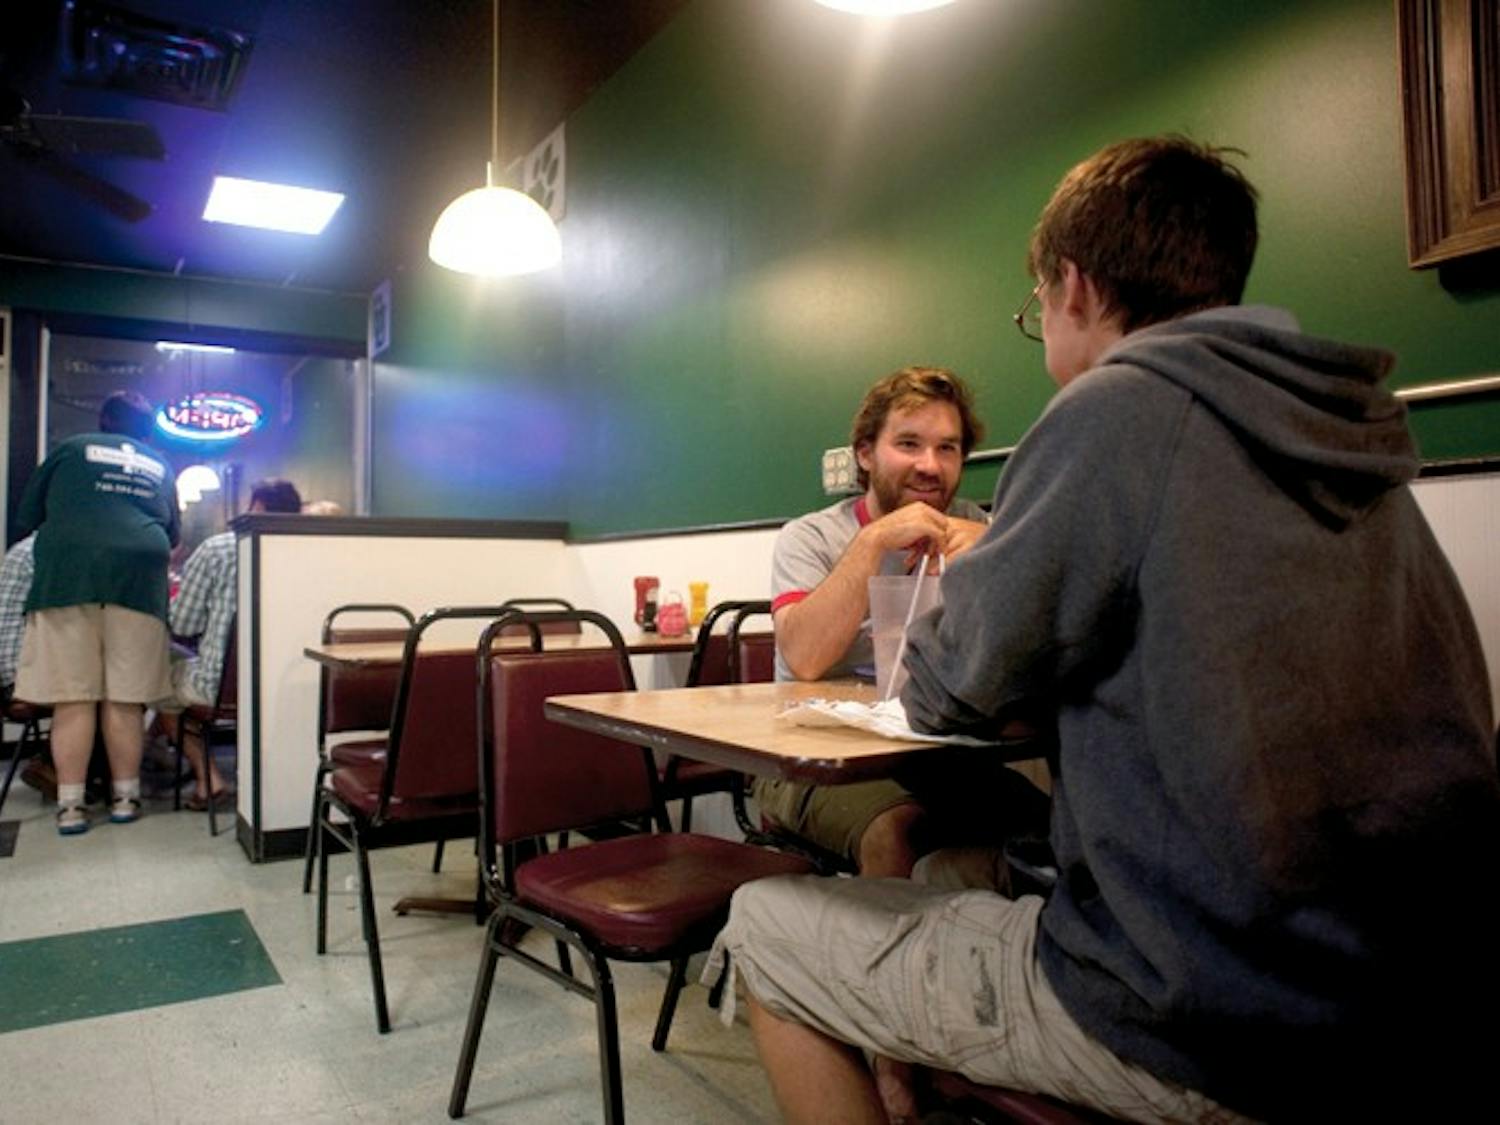 Athens eatery offers 24-hour service for hungry students  